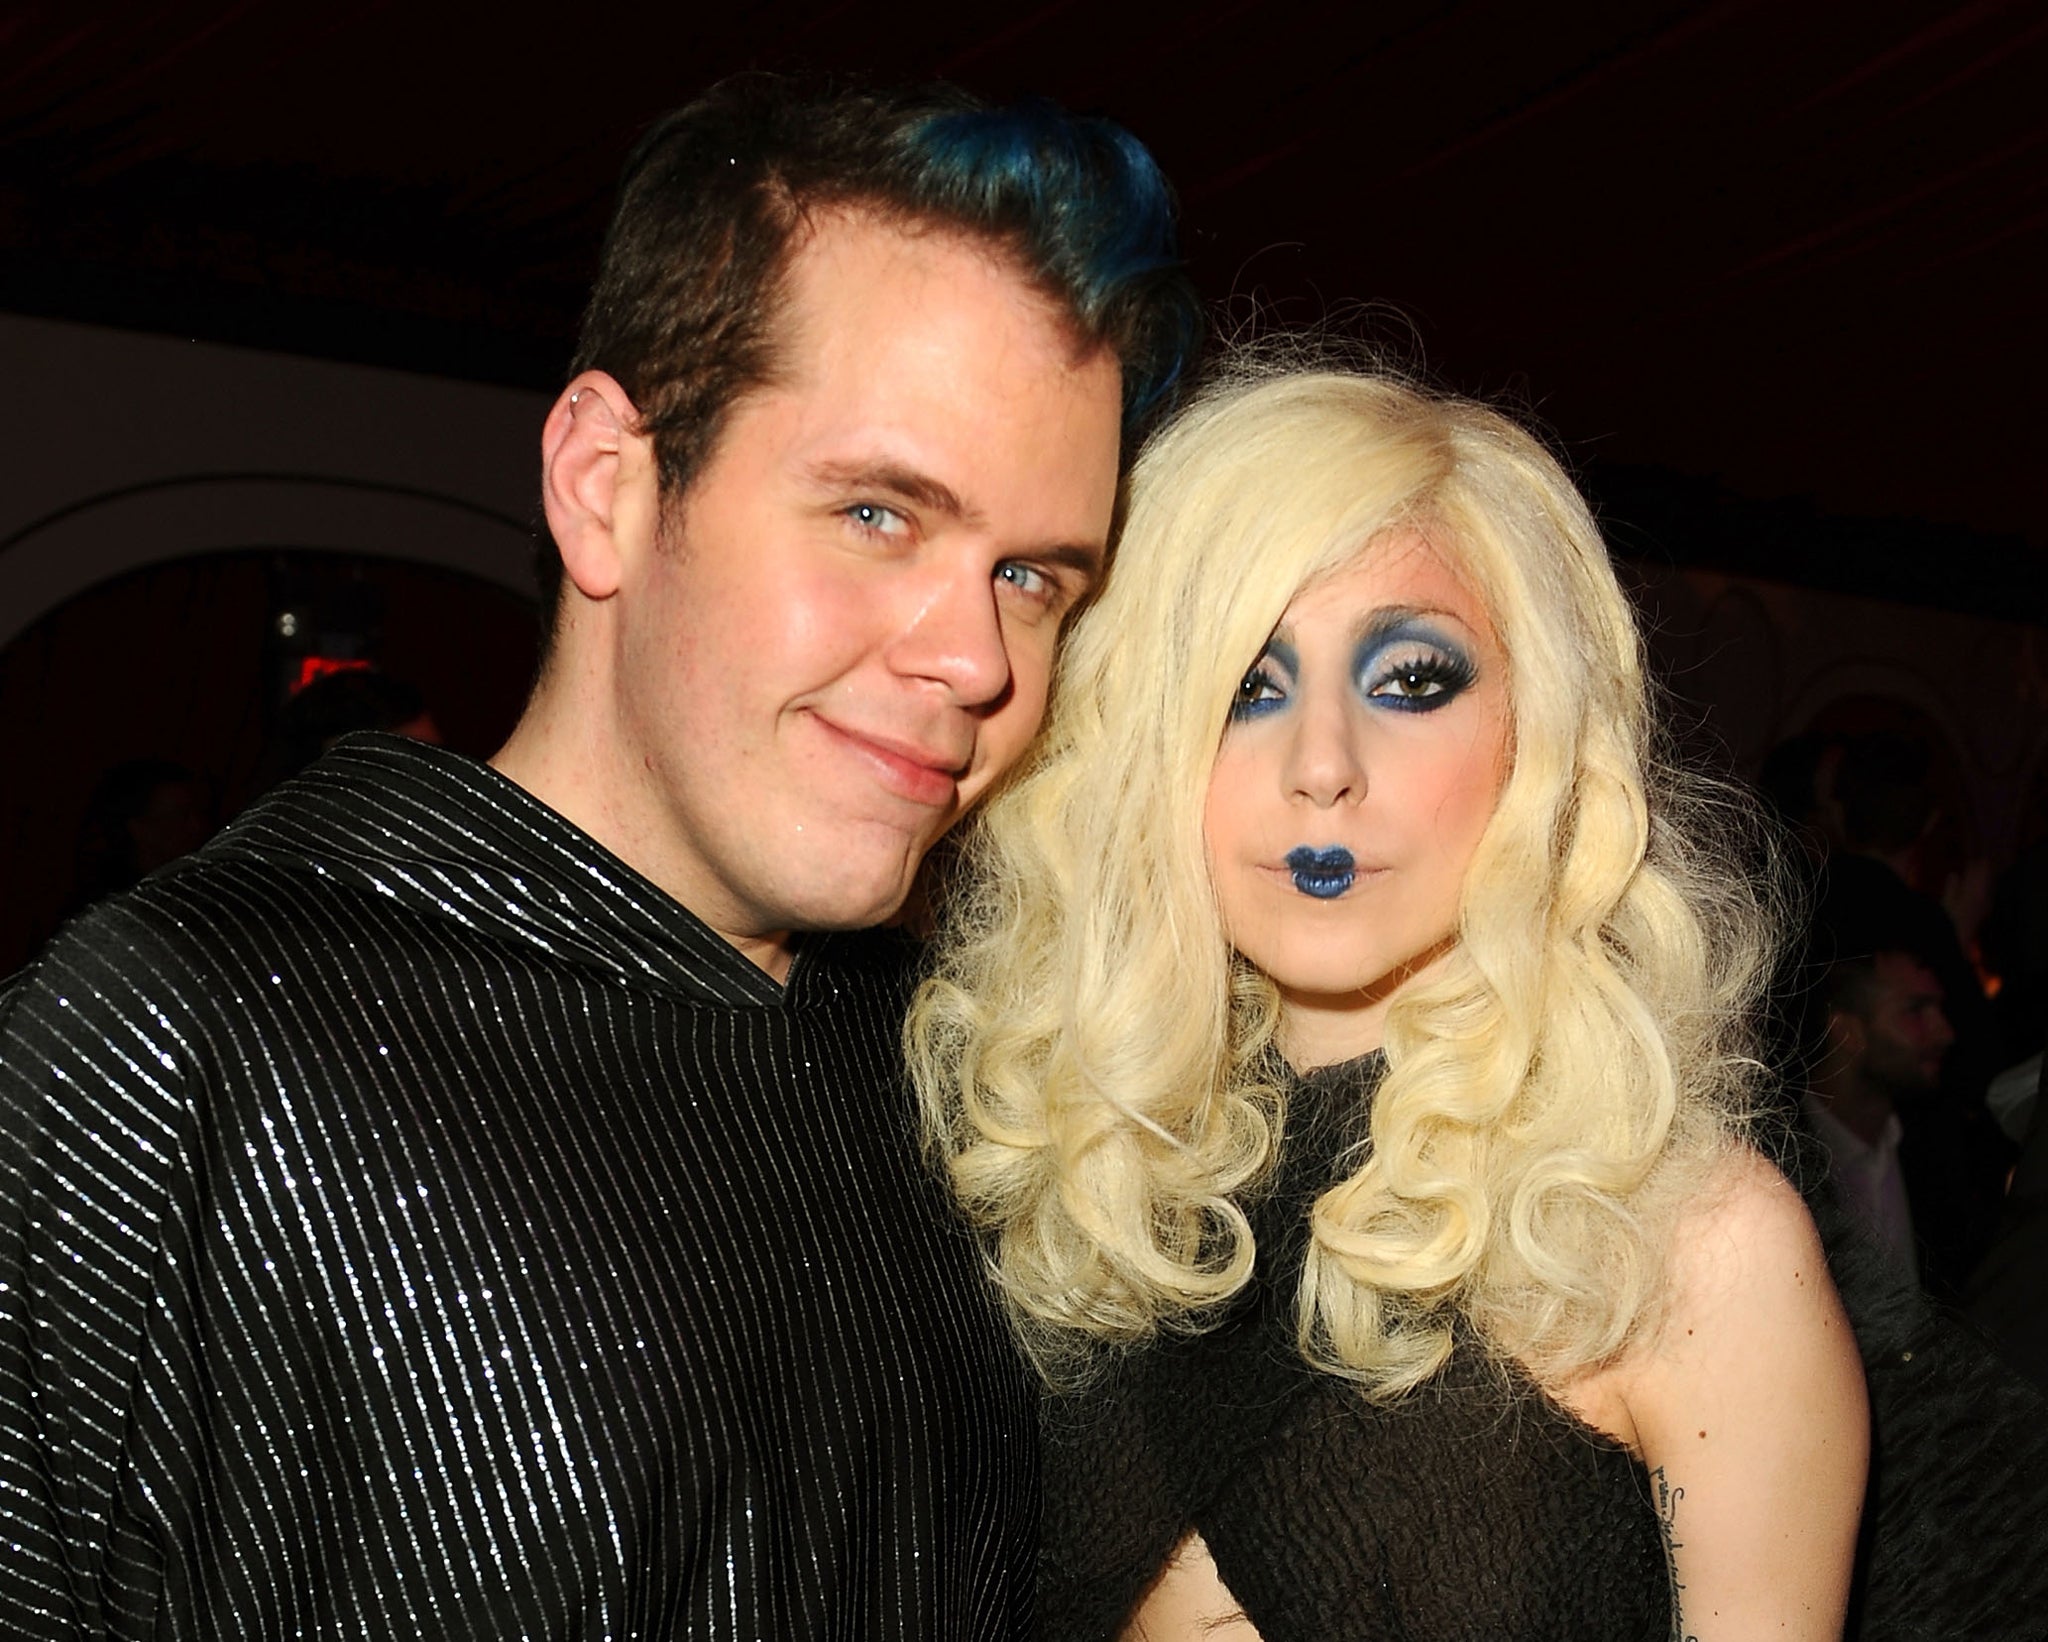 Former friends: Perez Hilton and Lady Gaga pictured together in 2009.